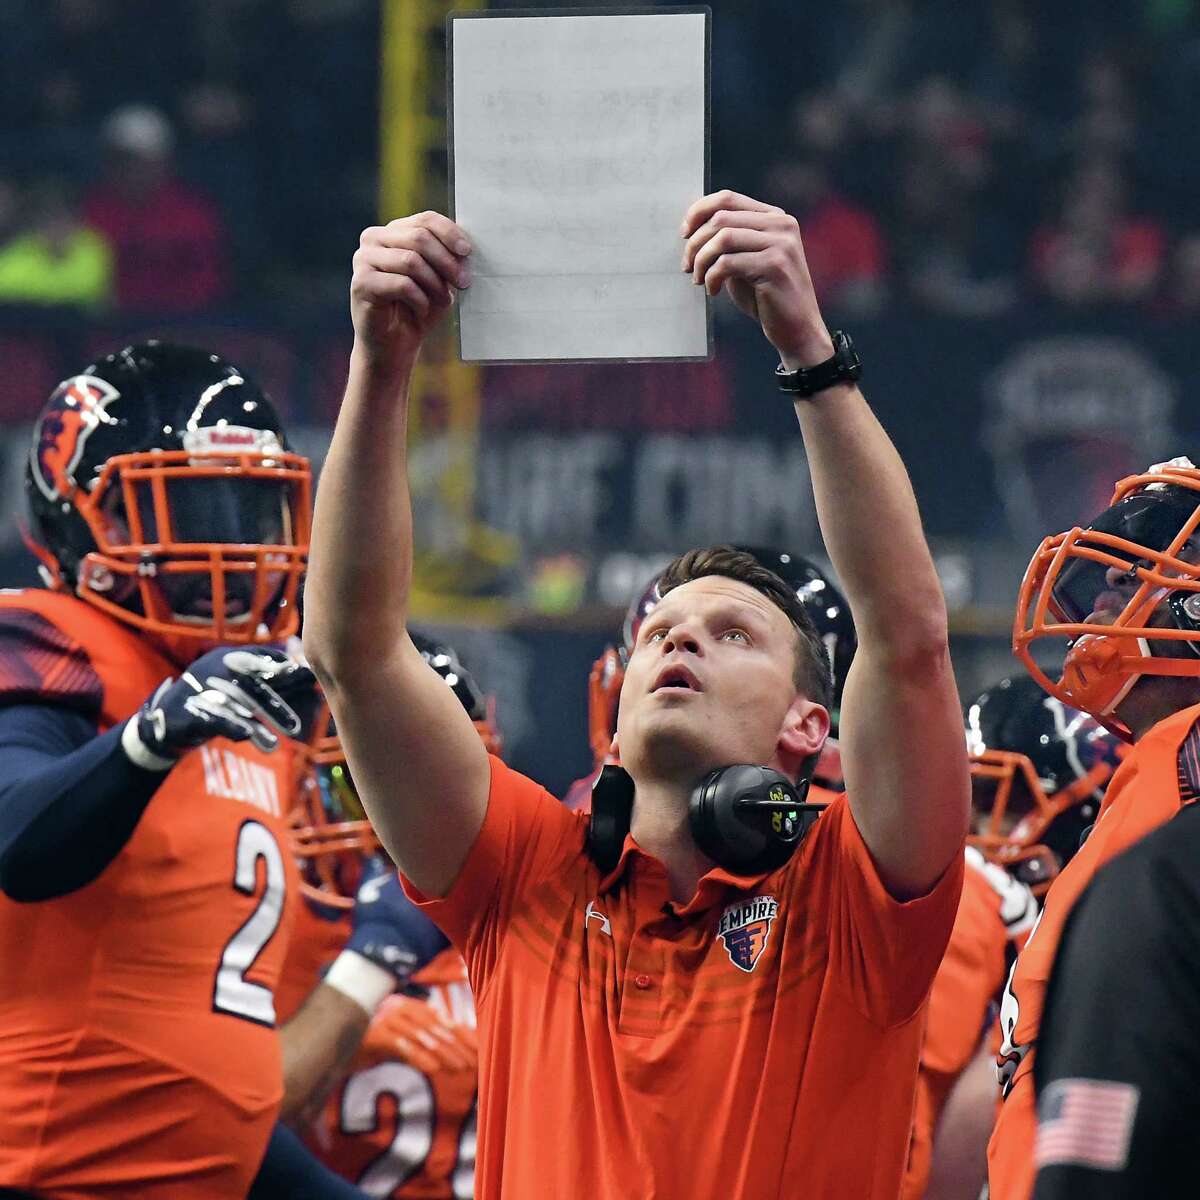 Albany Empire head coach Rob Keefe with players on the sidelines as they make their Arena Football League debut against the Philadelphia Soul to a packed house at the Times Union Center Saturday April 14, 2018 in Albany, NY. (John Carl D'Annibale/Times Union)